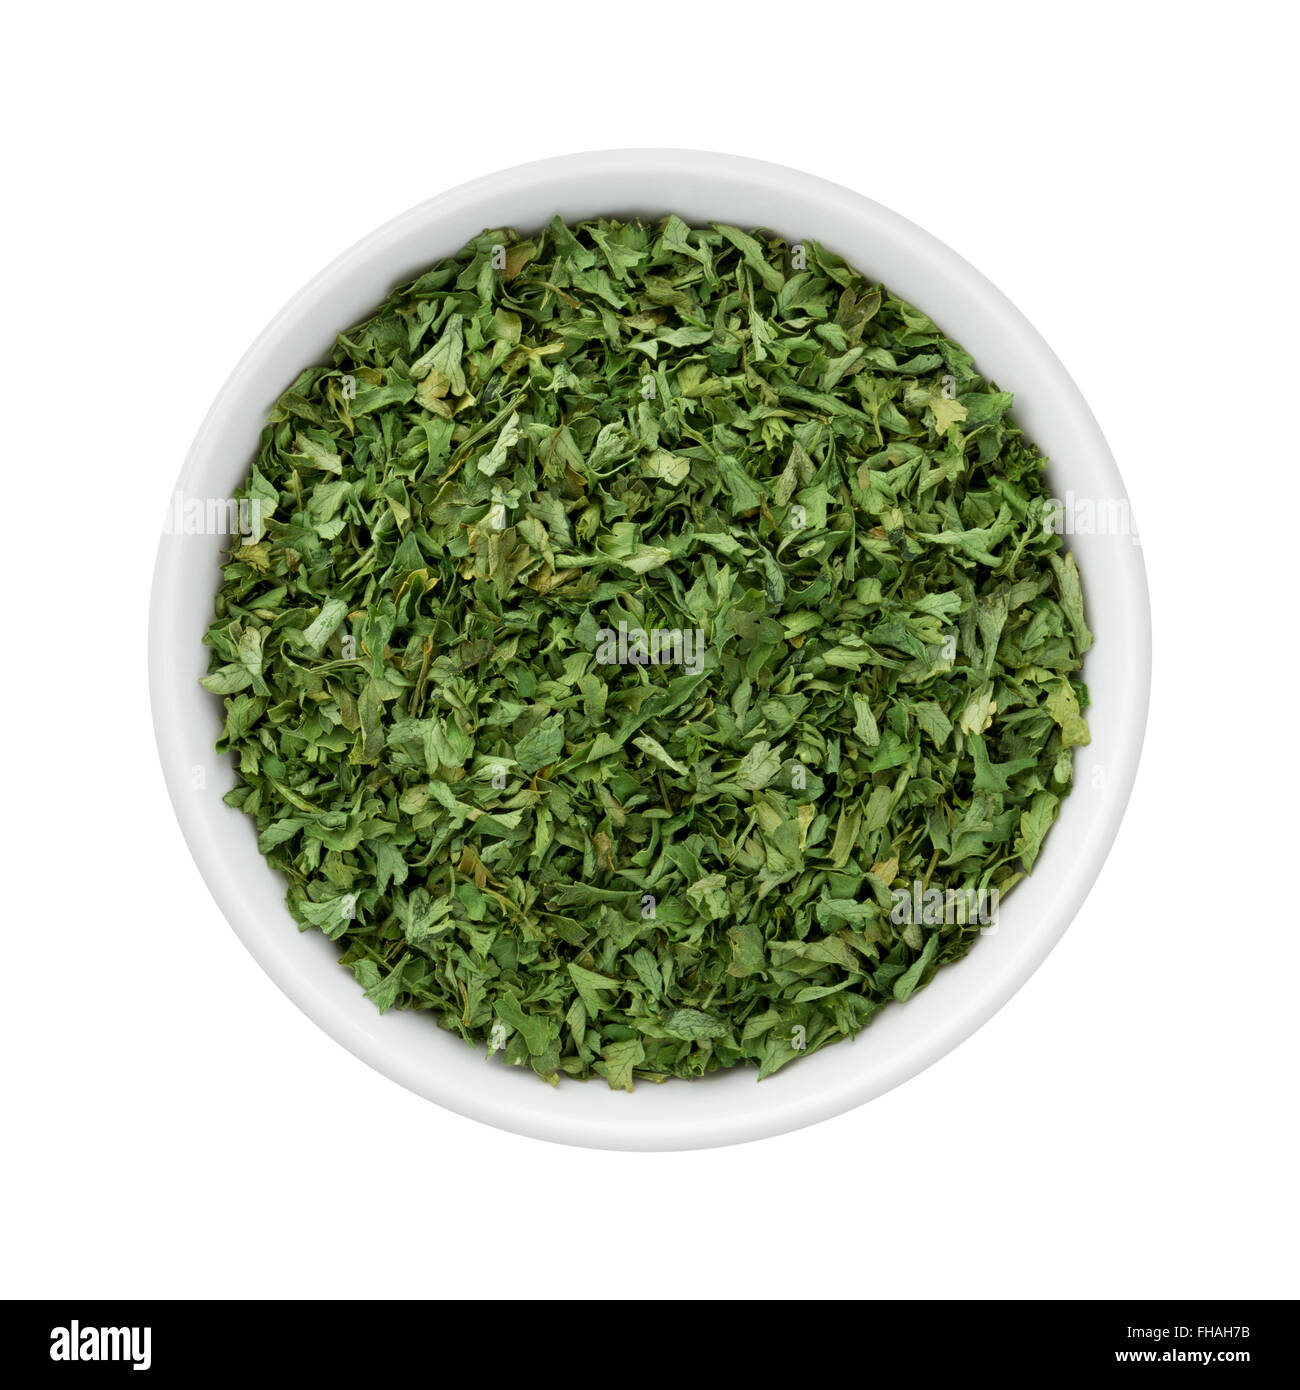 Dried Parsley Flakes in a Ceramic Bowl. The image is a cut out, isolated on a white background. Stock Photo